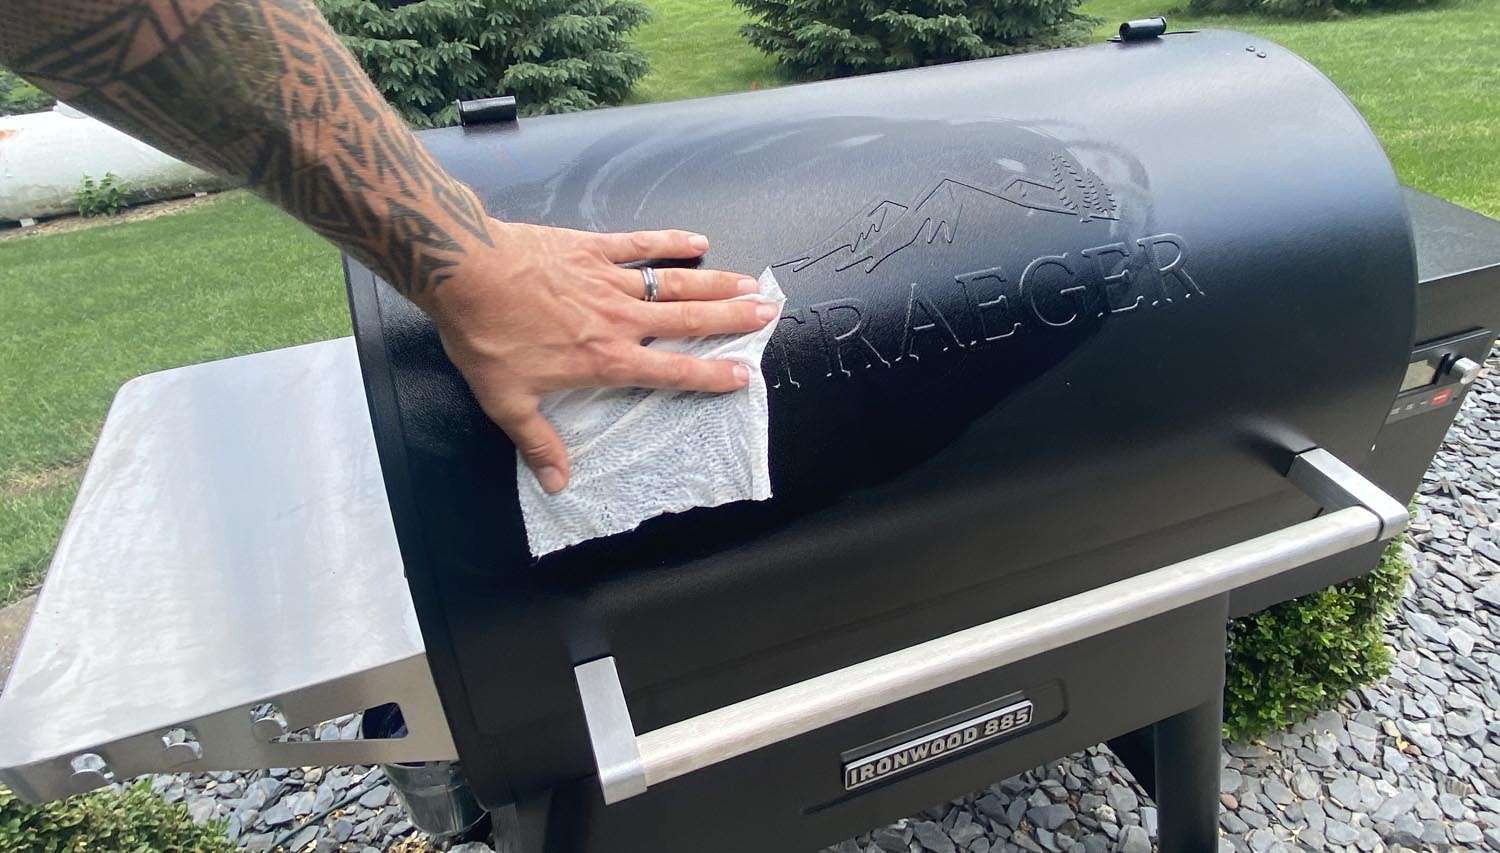 How To Clean a Traeger Grill